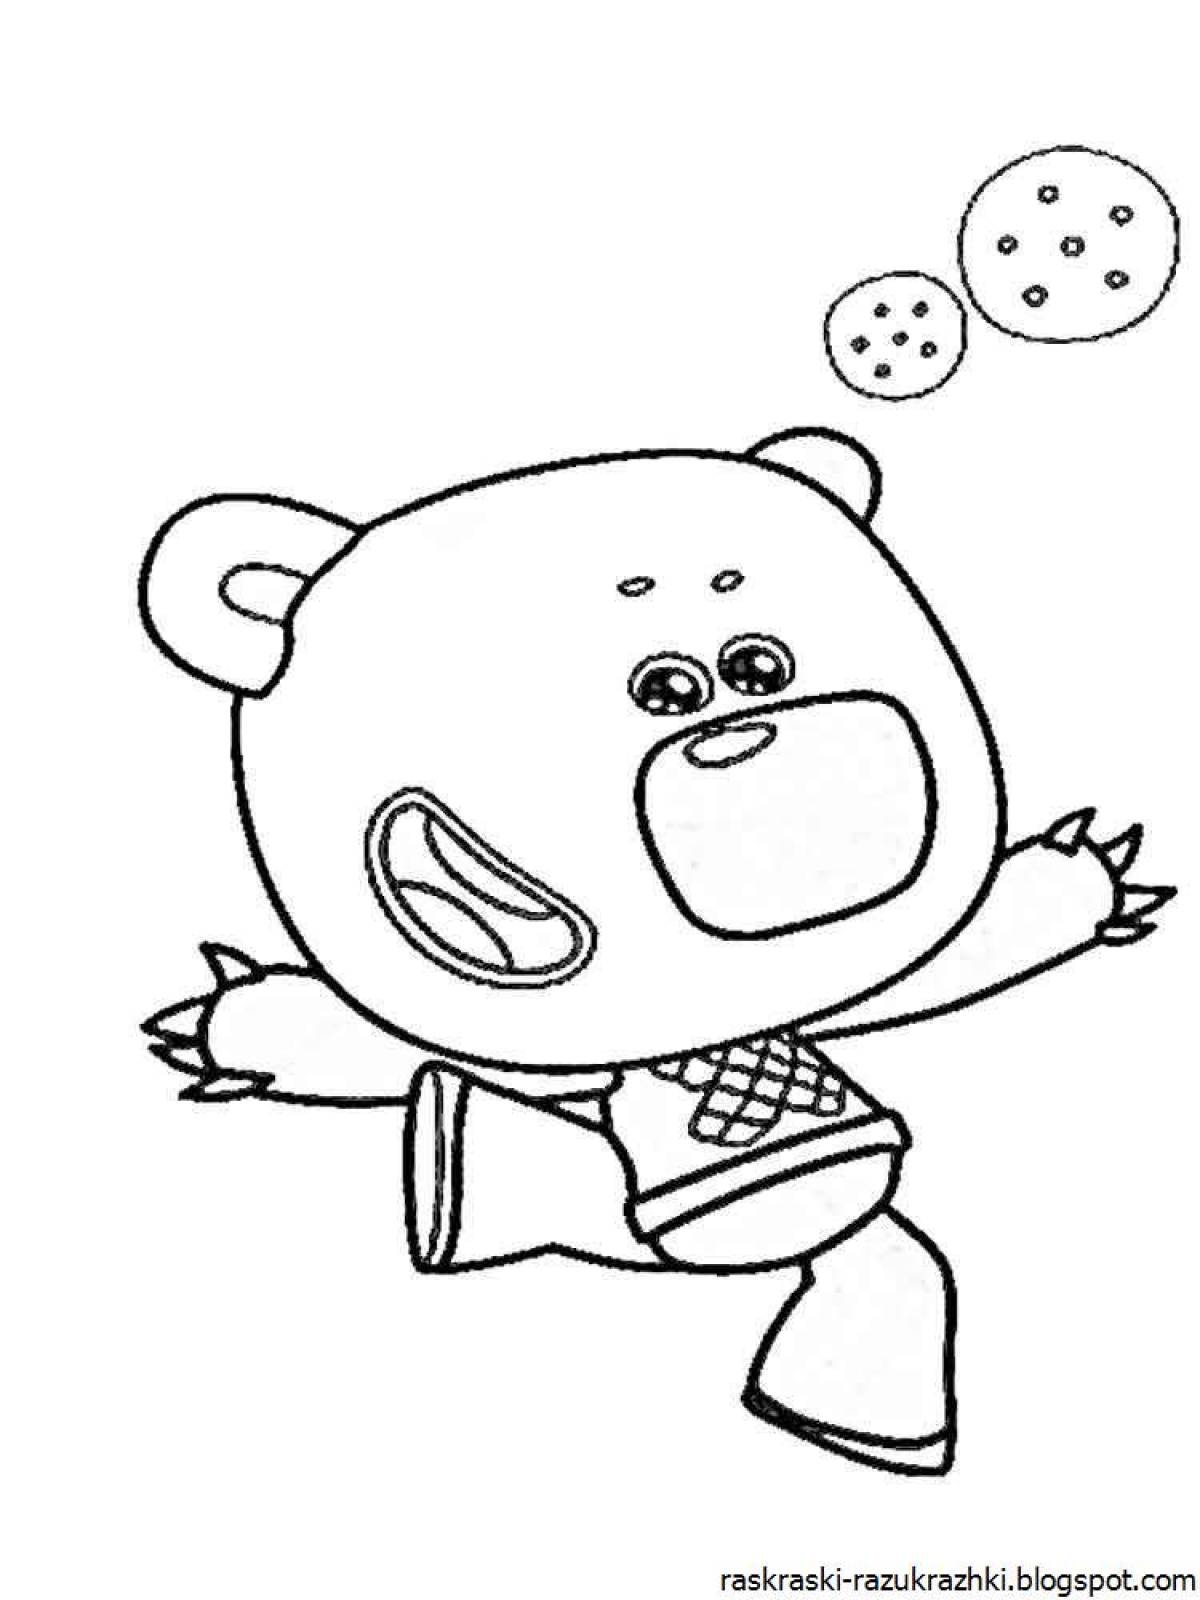 Attractive coloring of bears for children